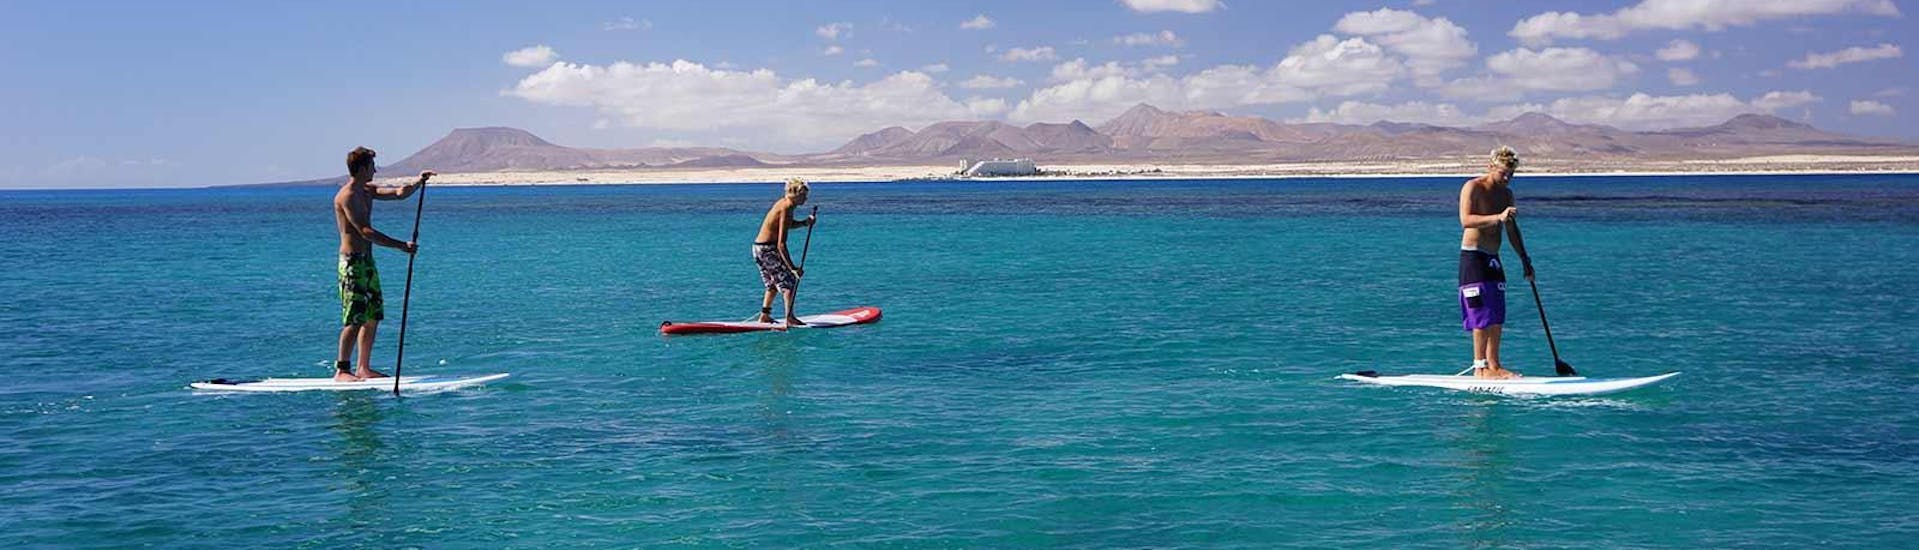 stand-up-paddle-for-kids-and-adults-beginner-cbcm-fuerteventura-hero